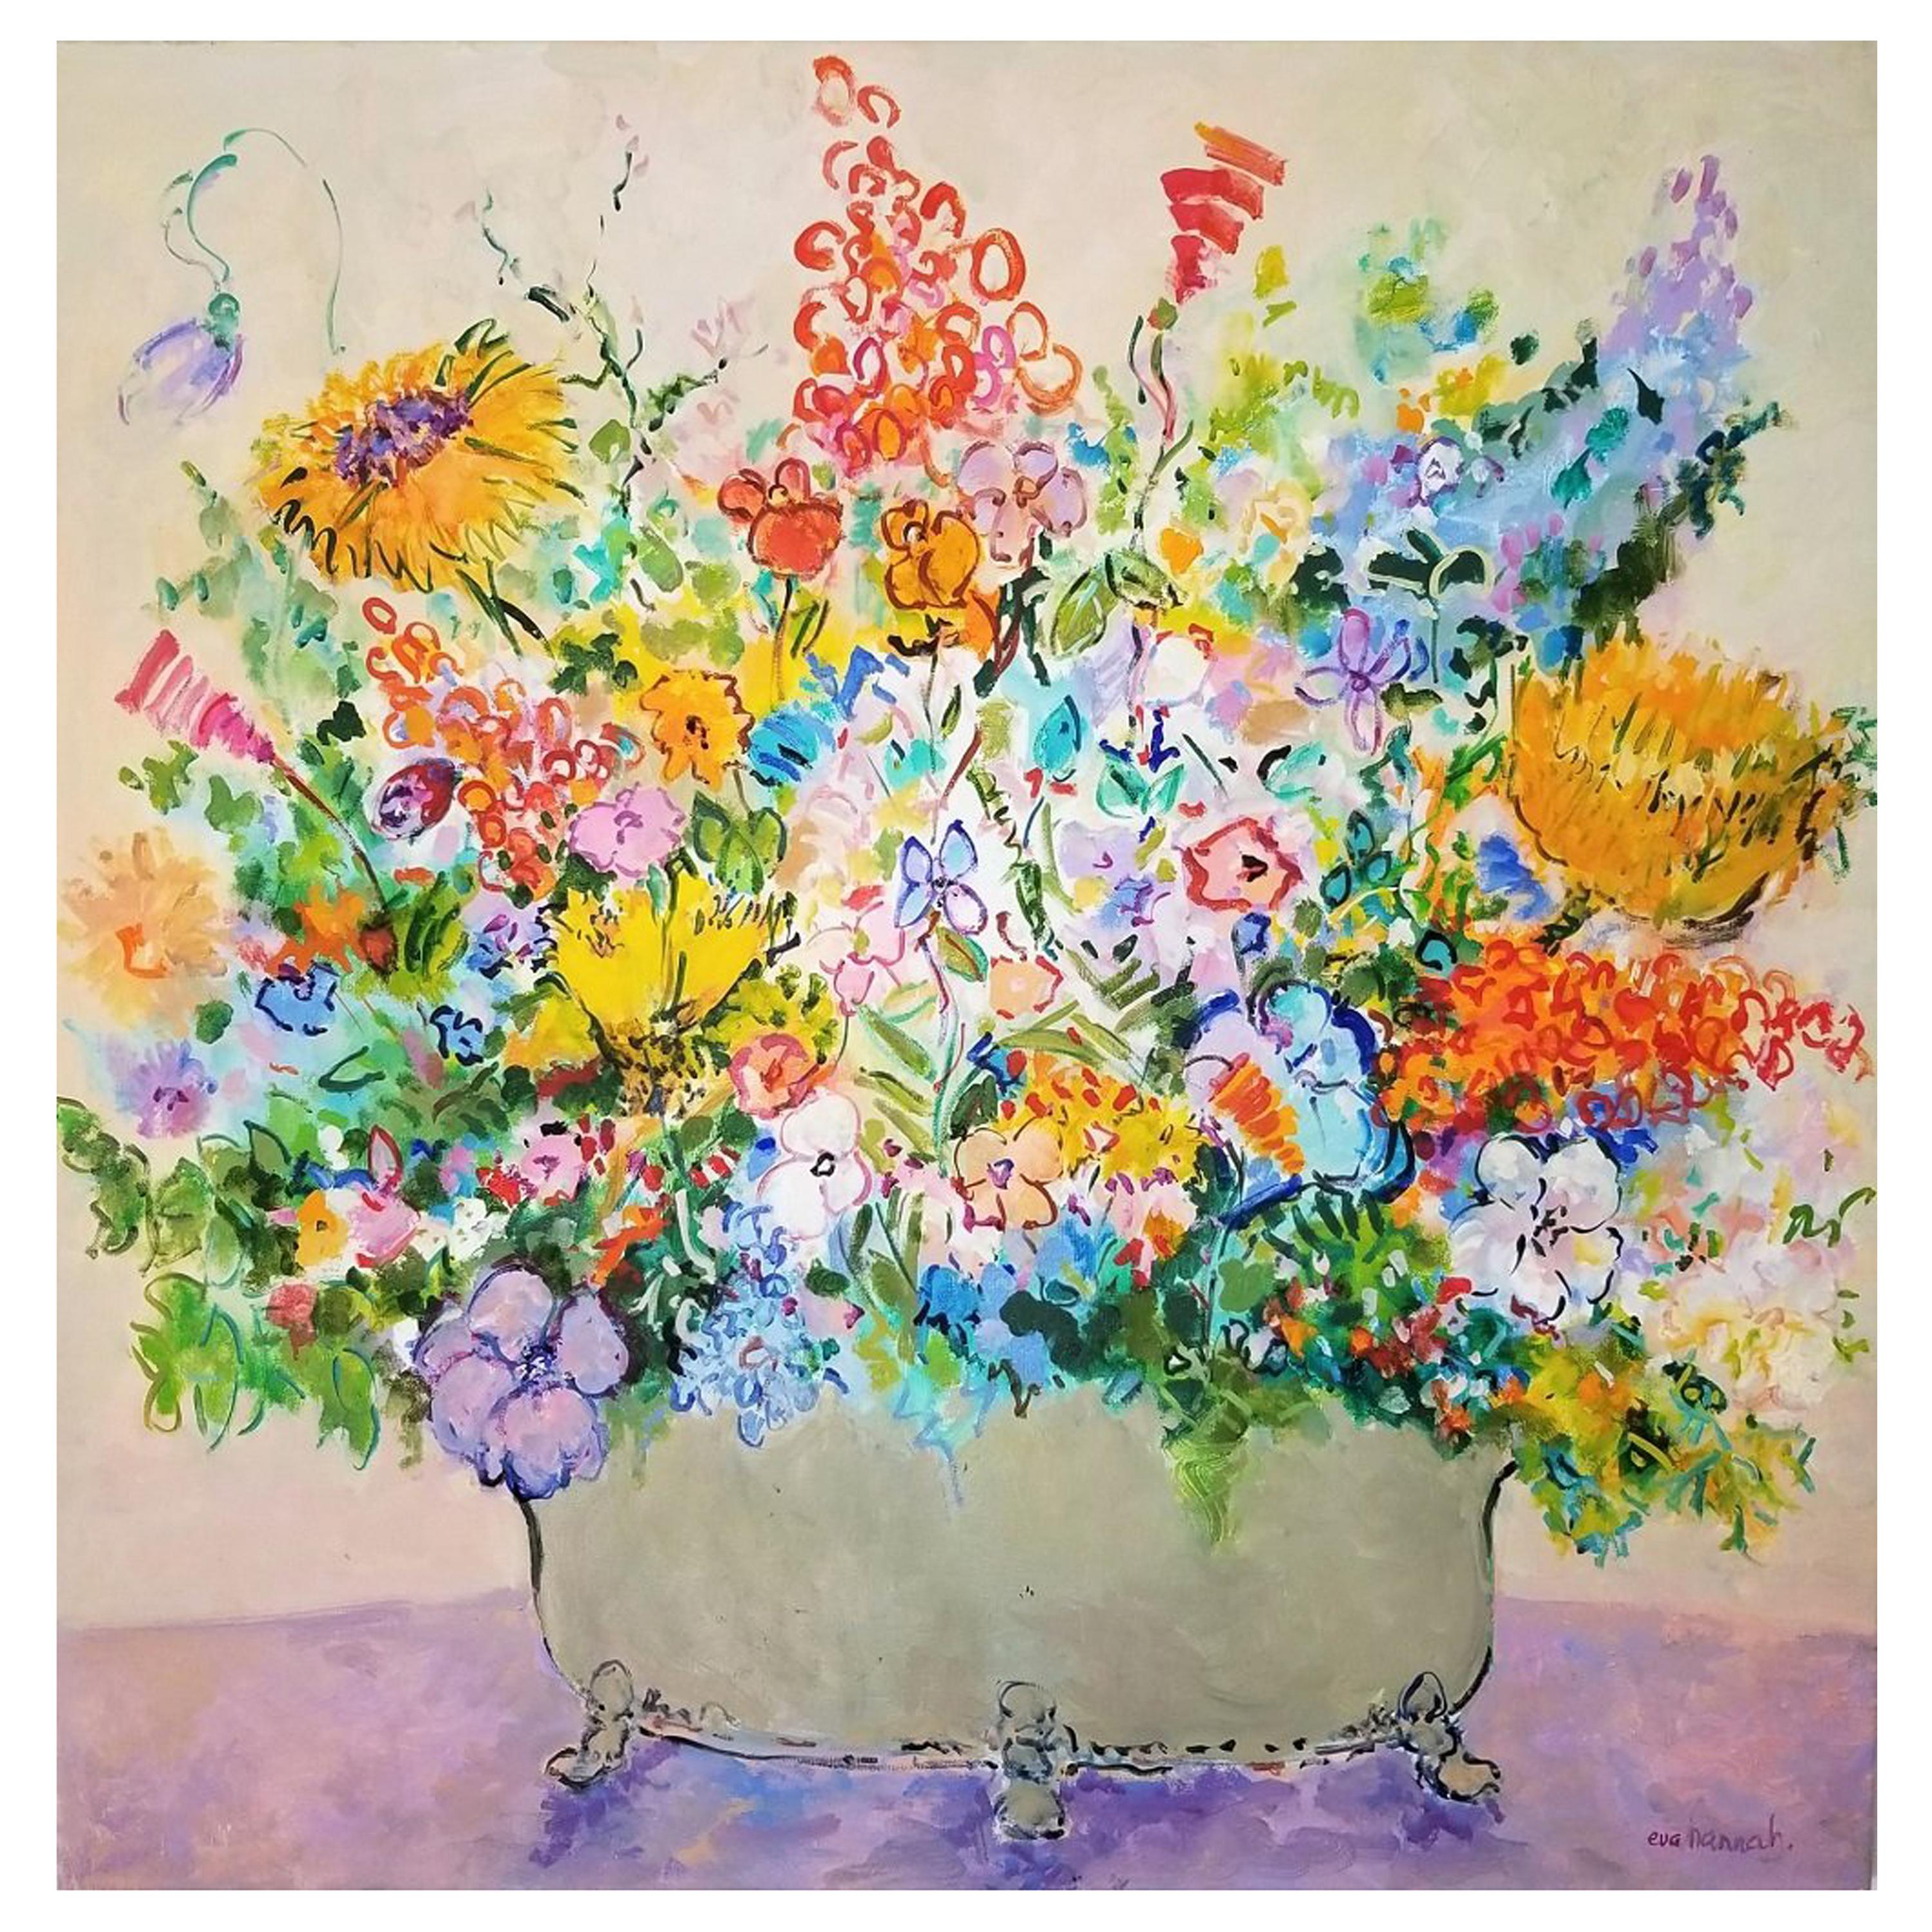  Eva Hannah "Spring Flowers" Oil Painting on Canvas, Signed 2018